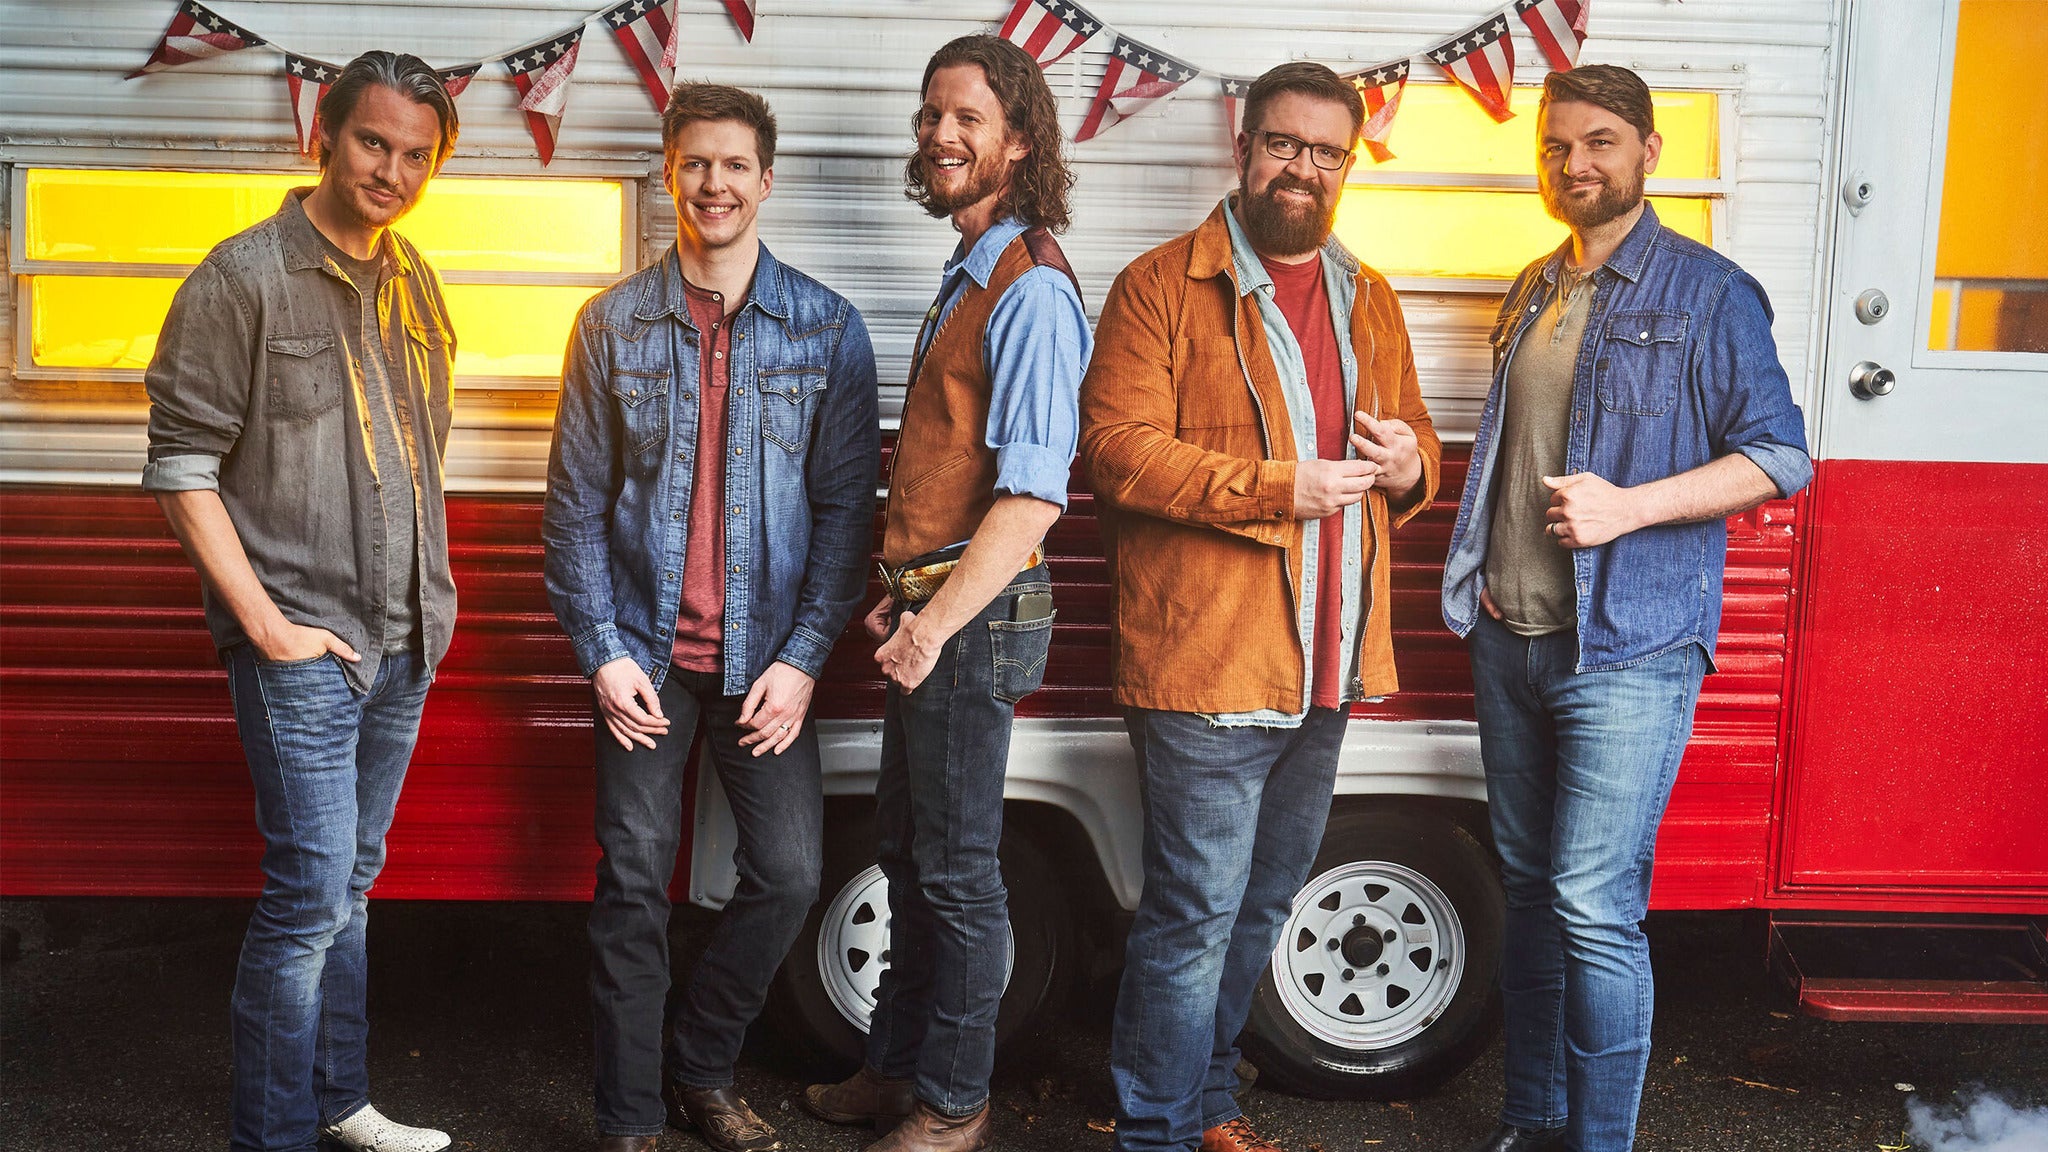 Home Free Family Christmas Tour at Adler Theatre